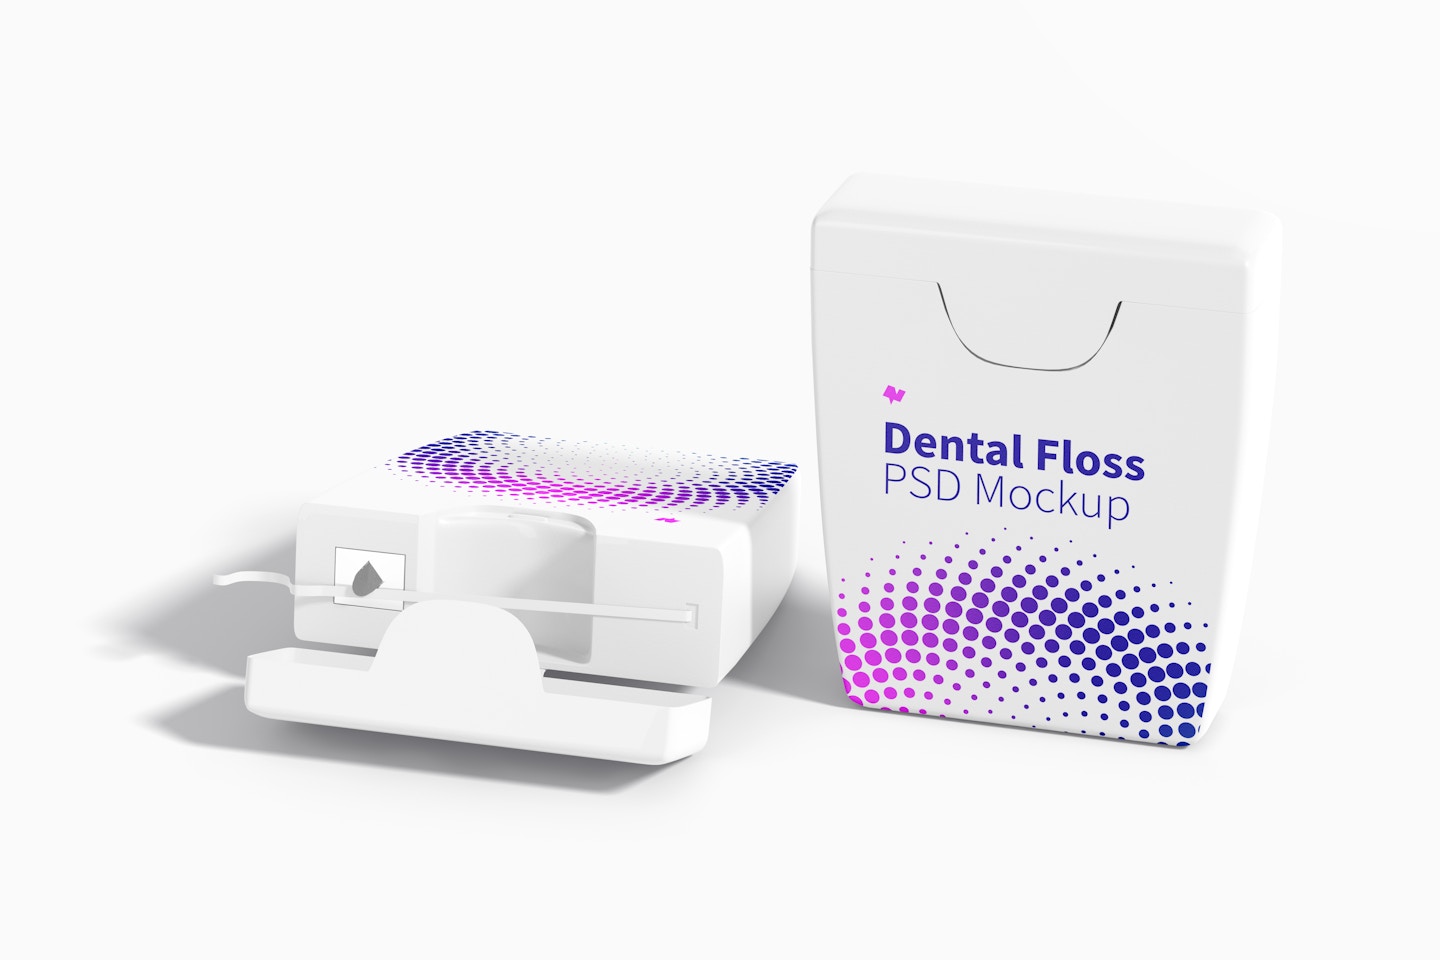 Dental Flosses Mockup, Standing and Dropped